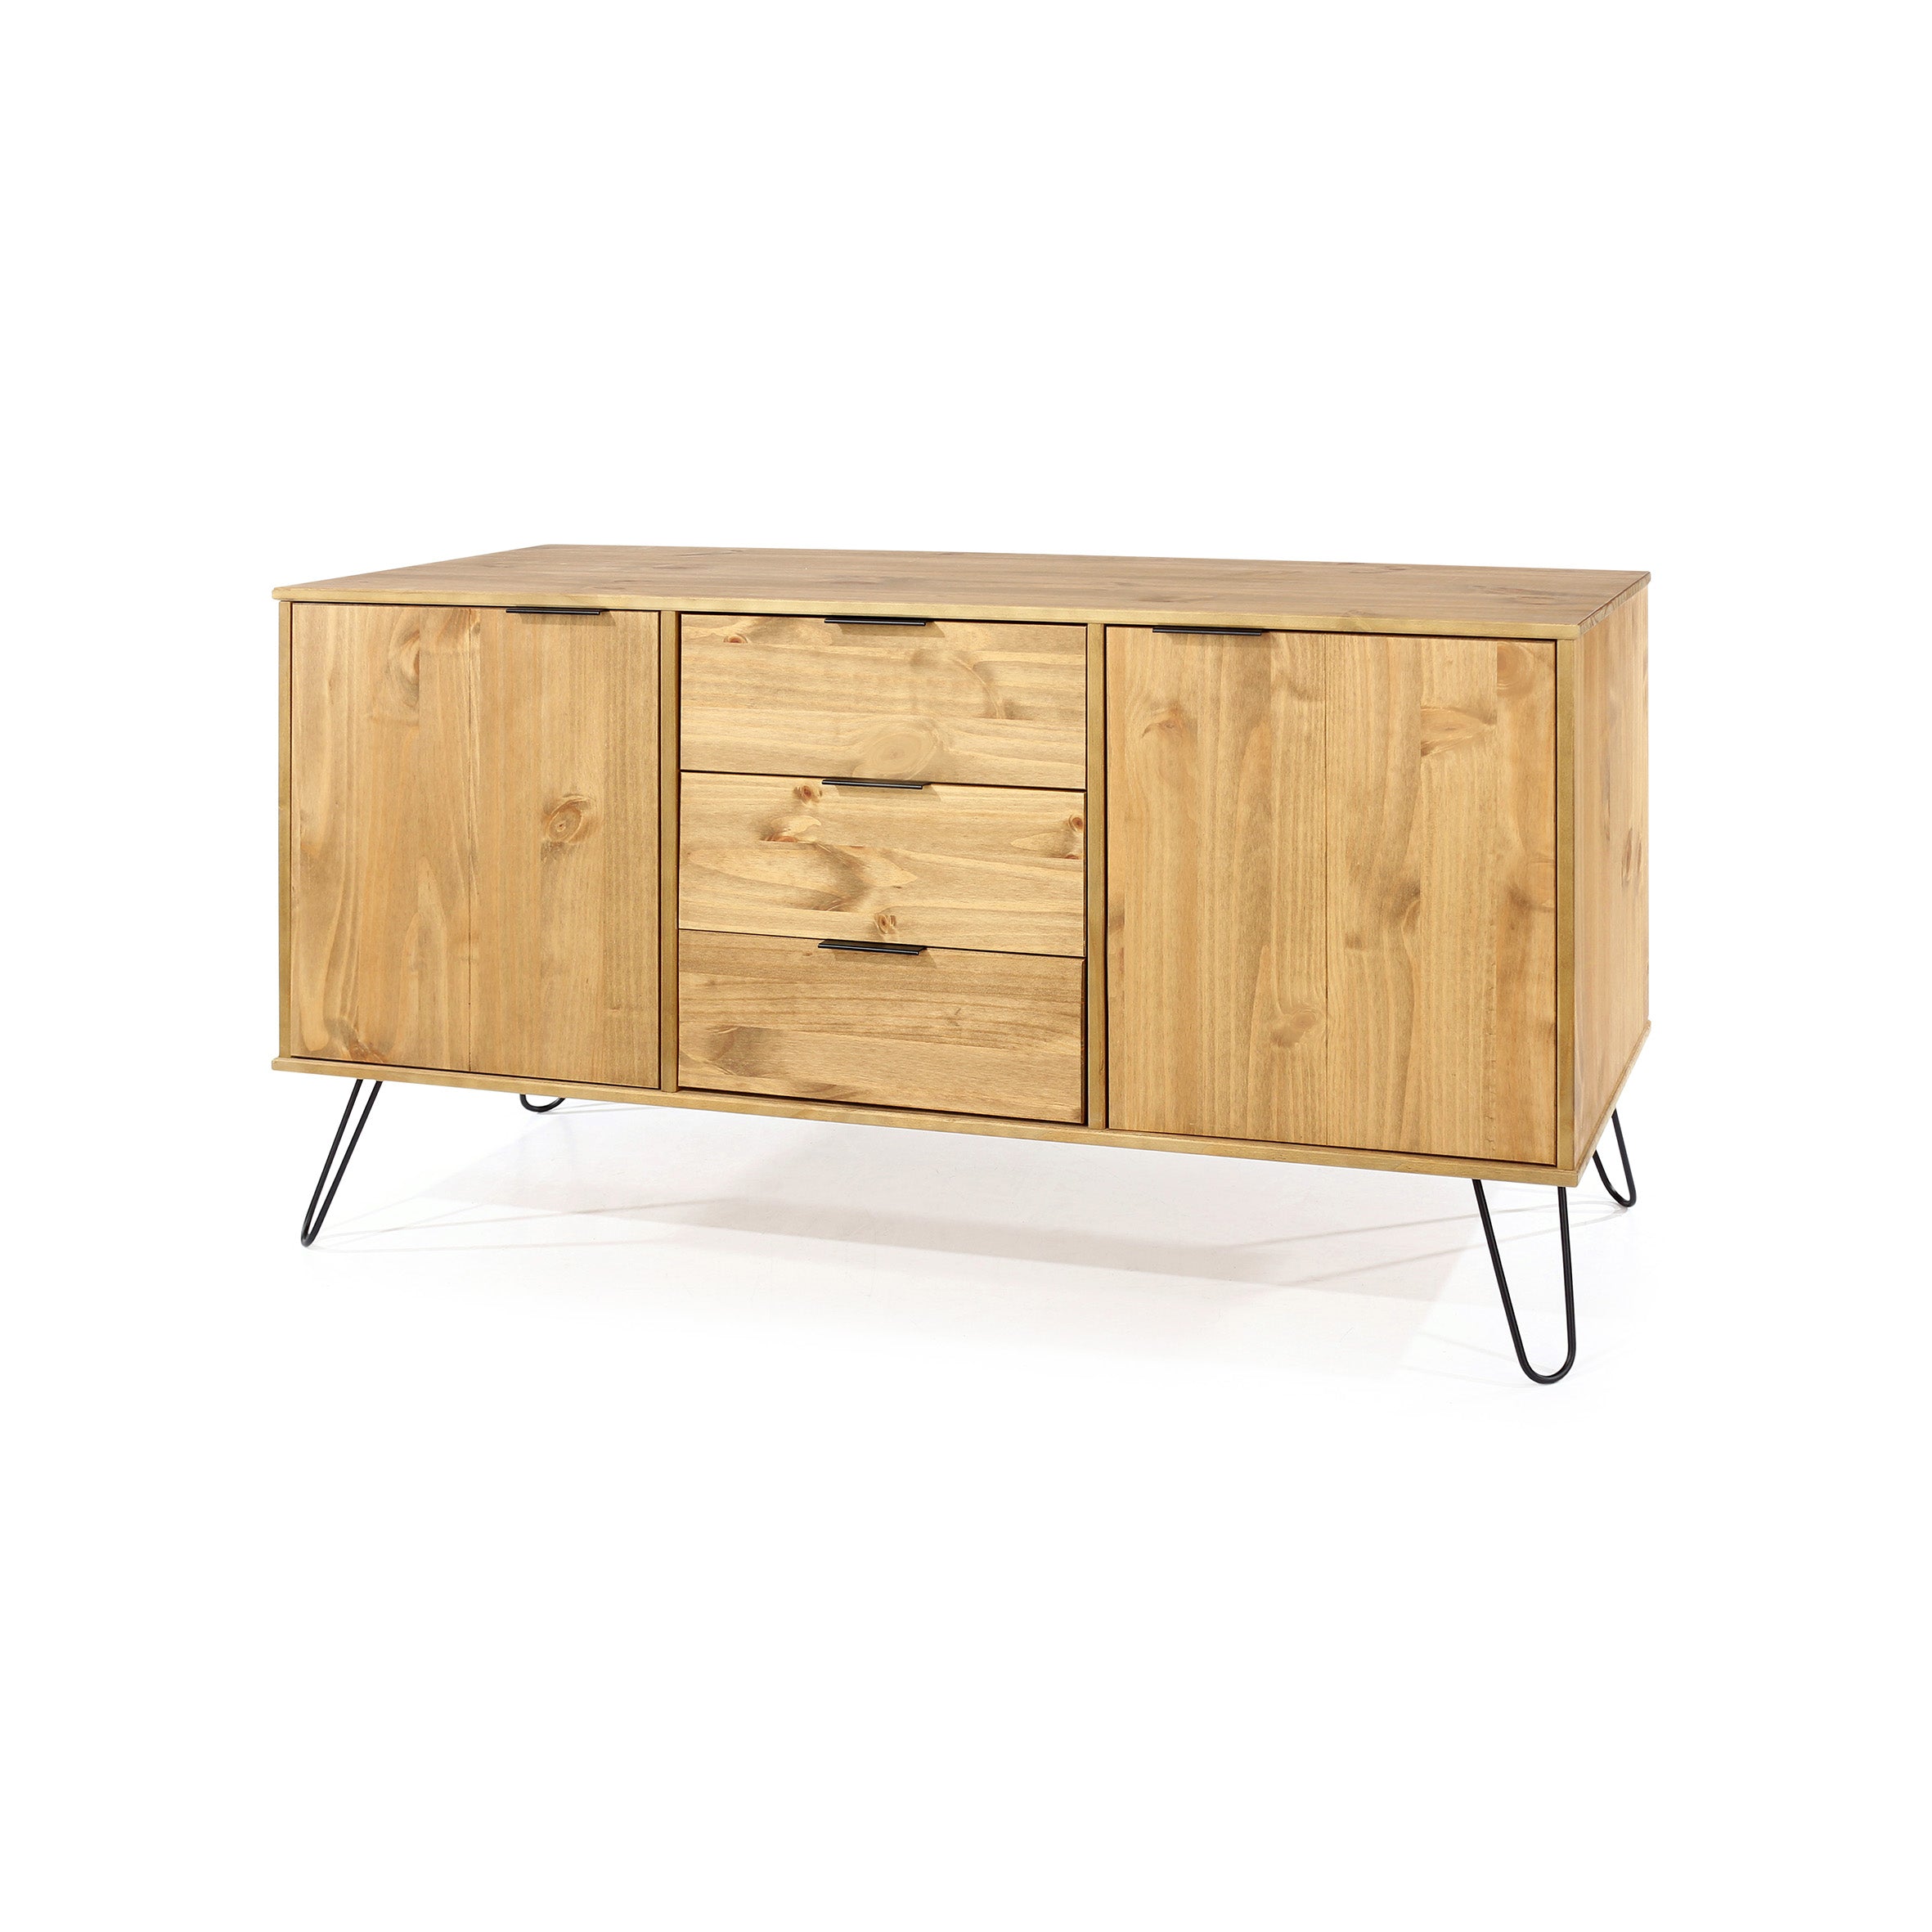 Alyese Wooden Medium Sideboard With 2 Doors And 3 Drawers For Core Products - CFD-AG916